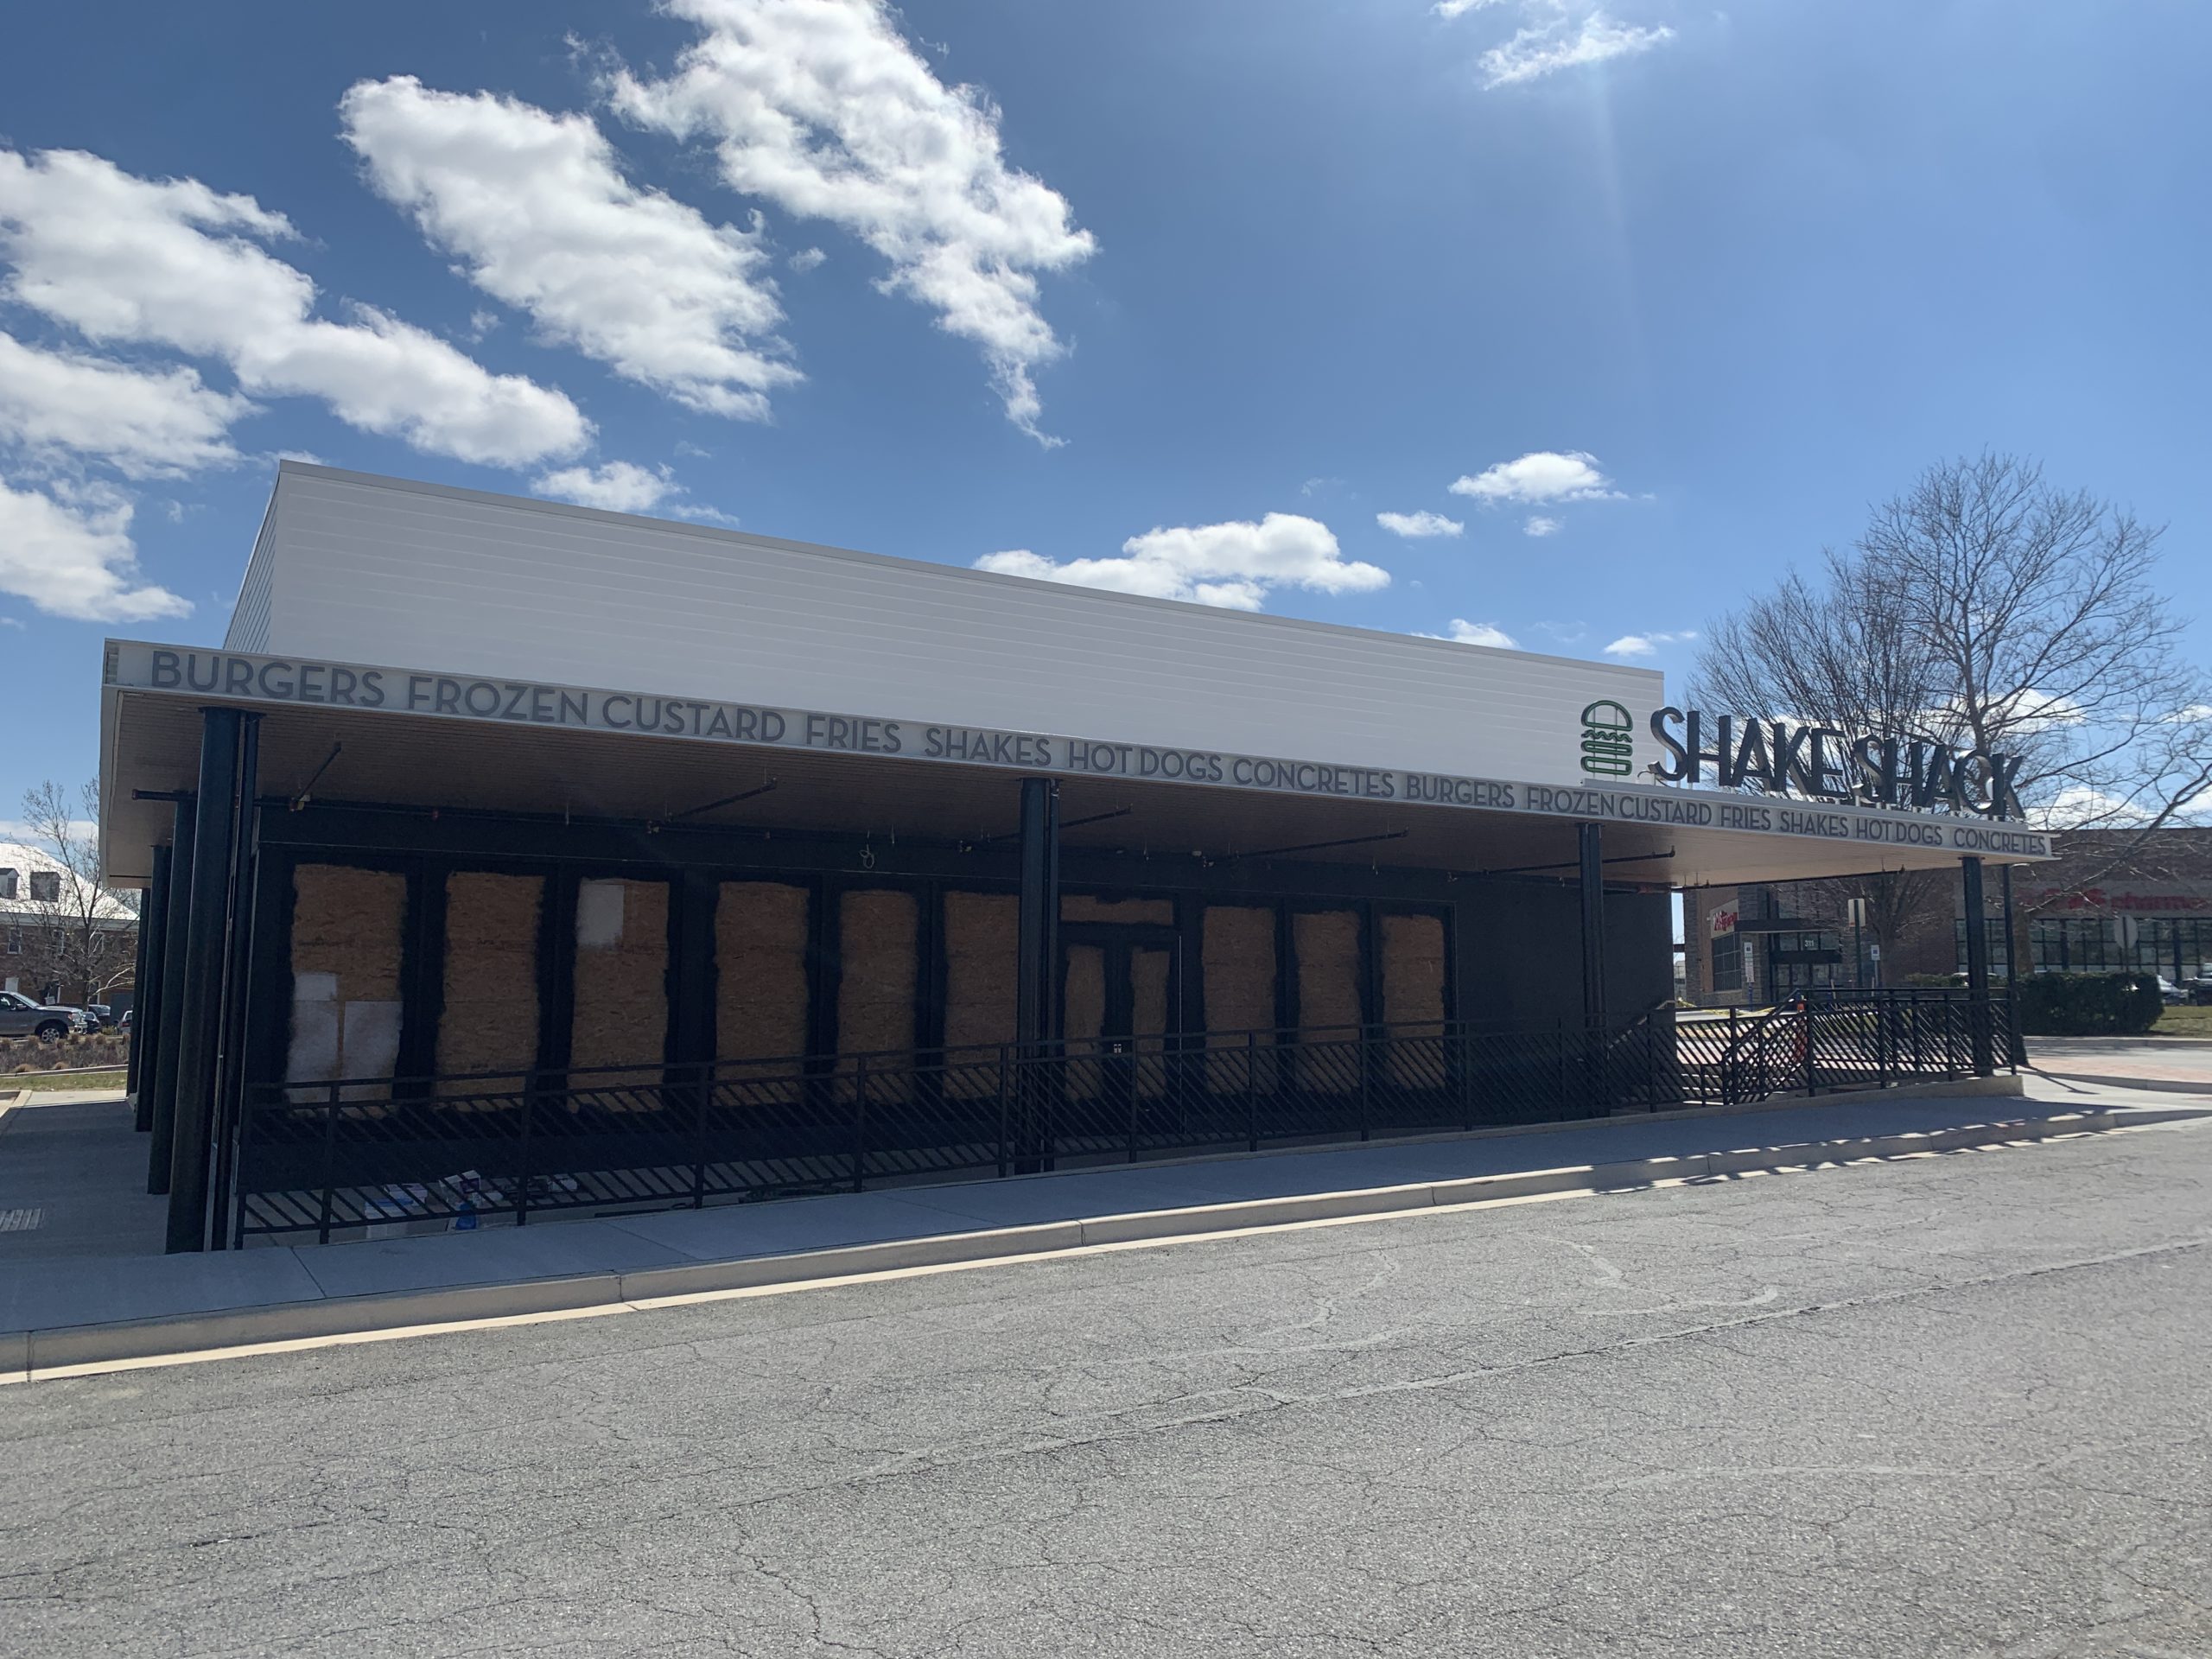 A new Shake Shack is being built in the Kentlands. The expected time of opening is the first half of 2023. The building is going to be 4,700 square feet.